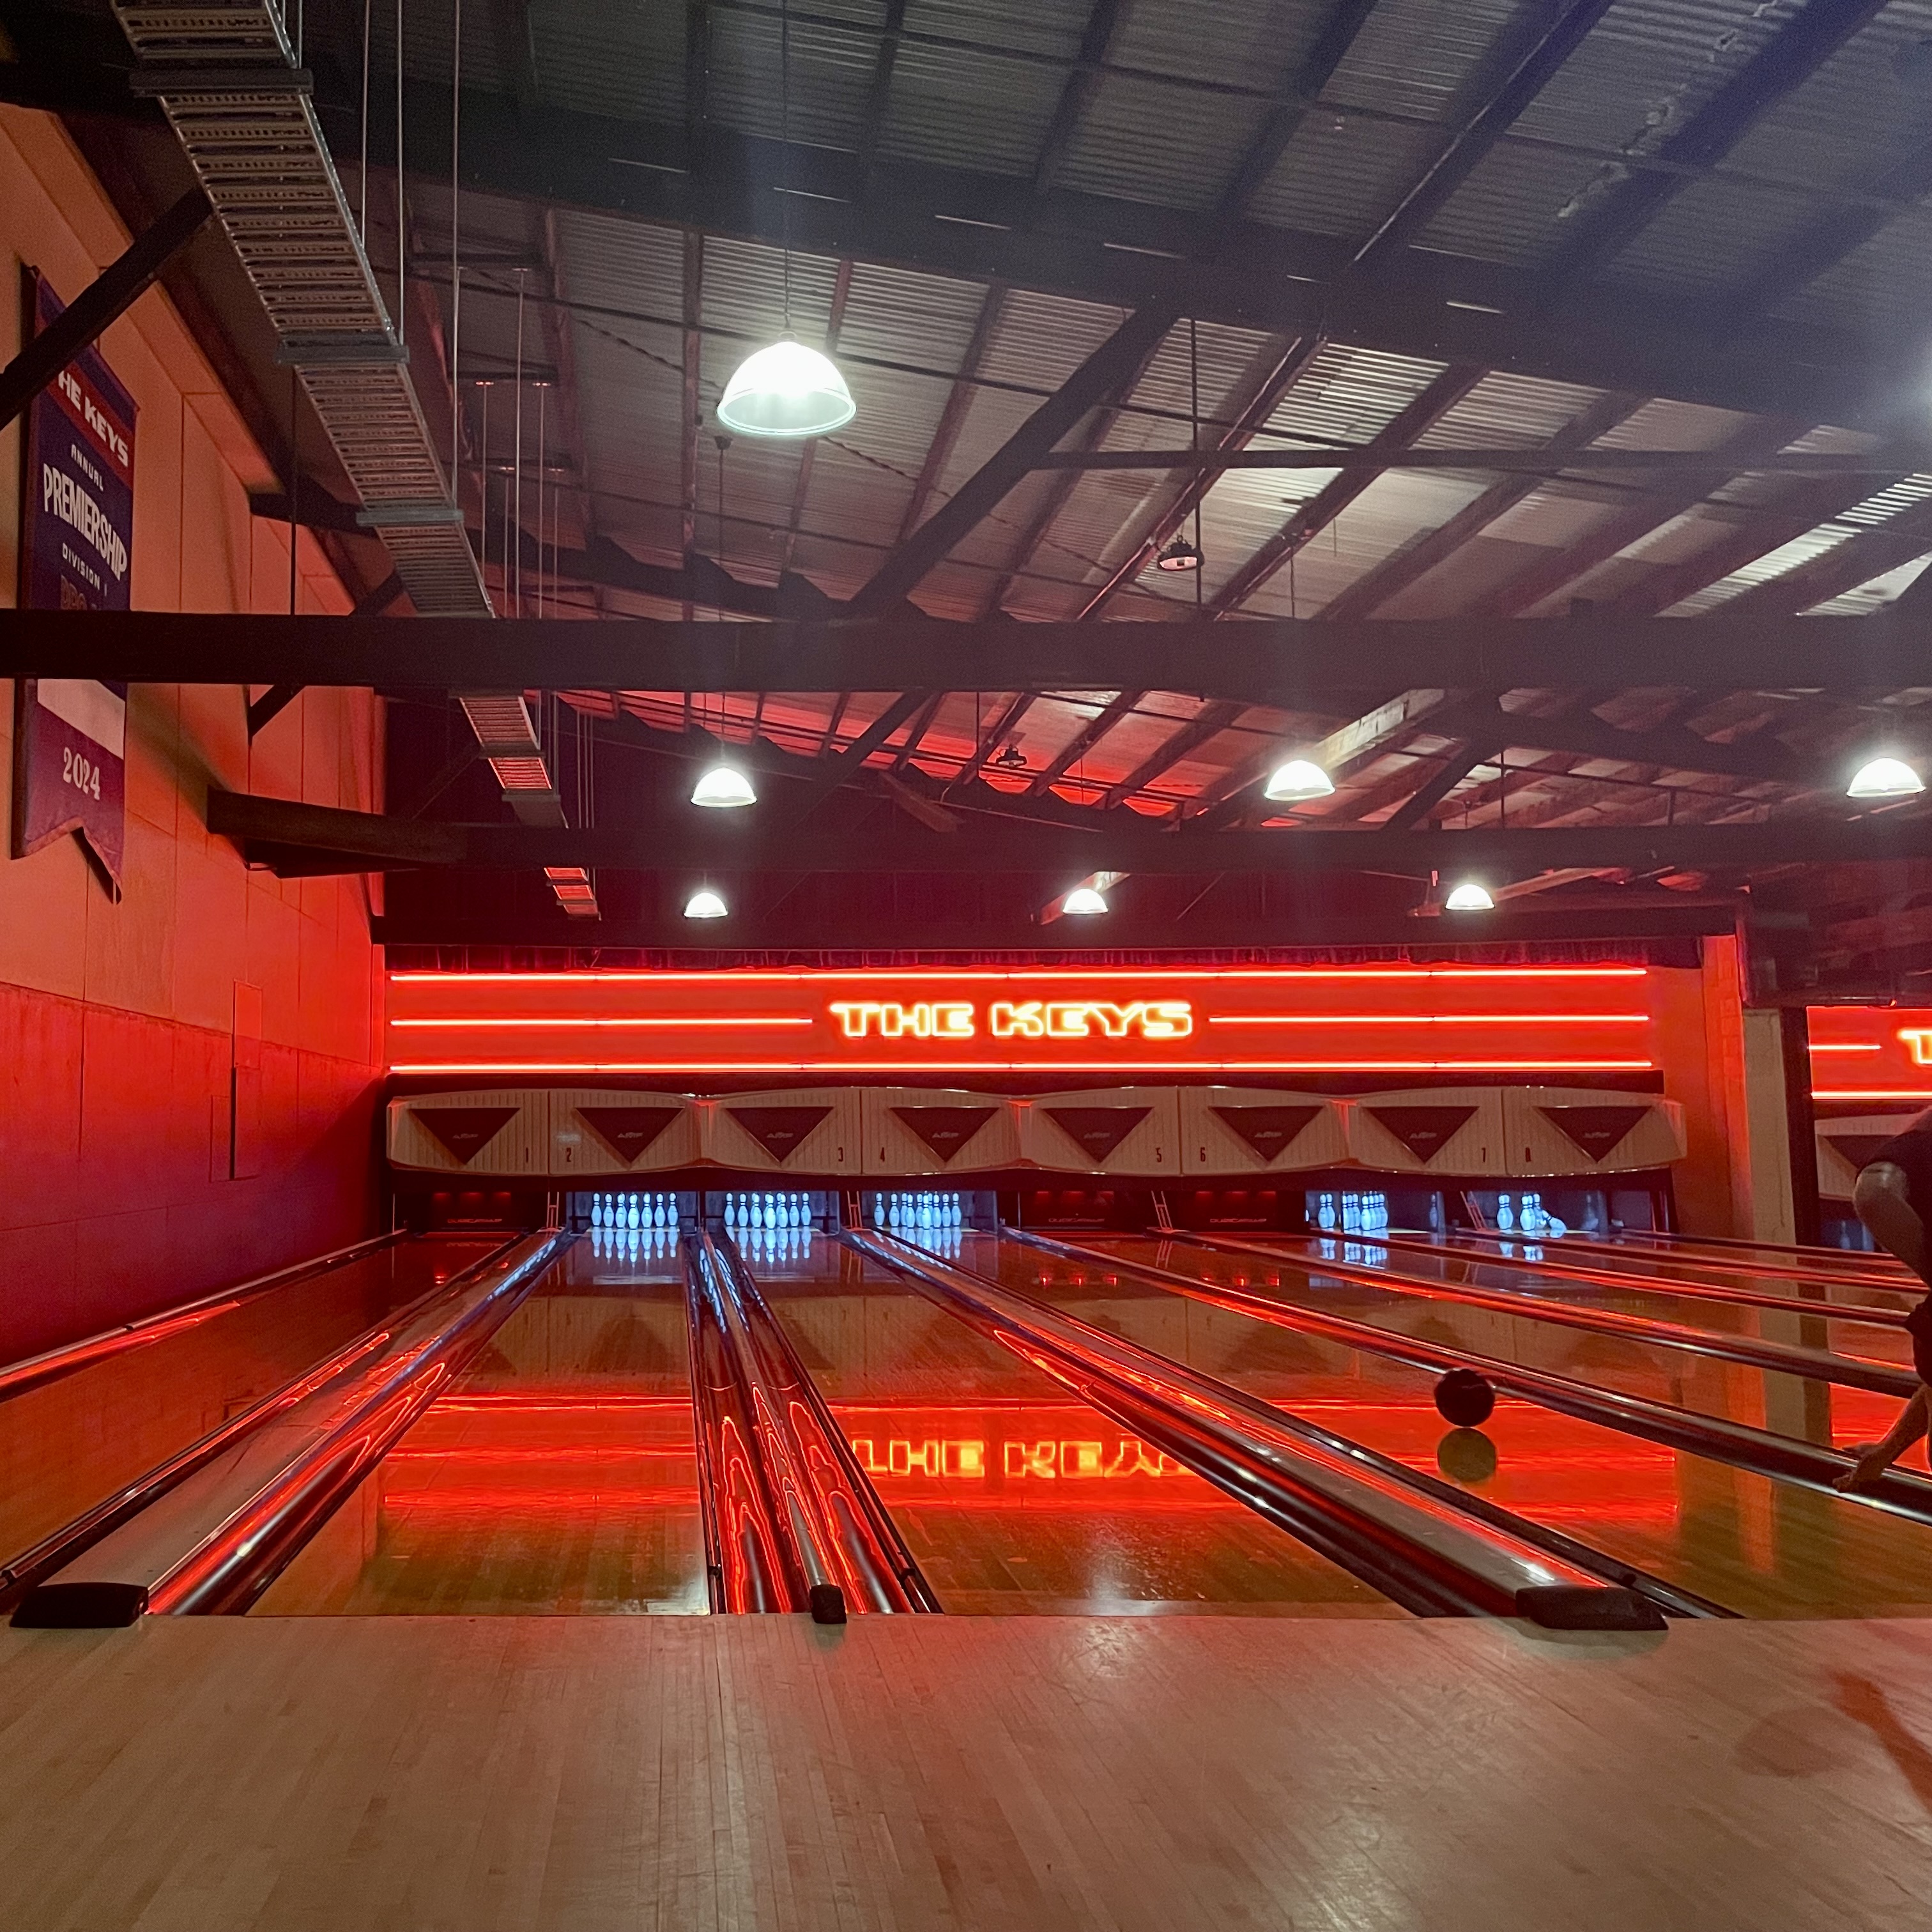 A bowling alley with a neon sign that says "the keys"